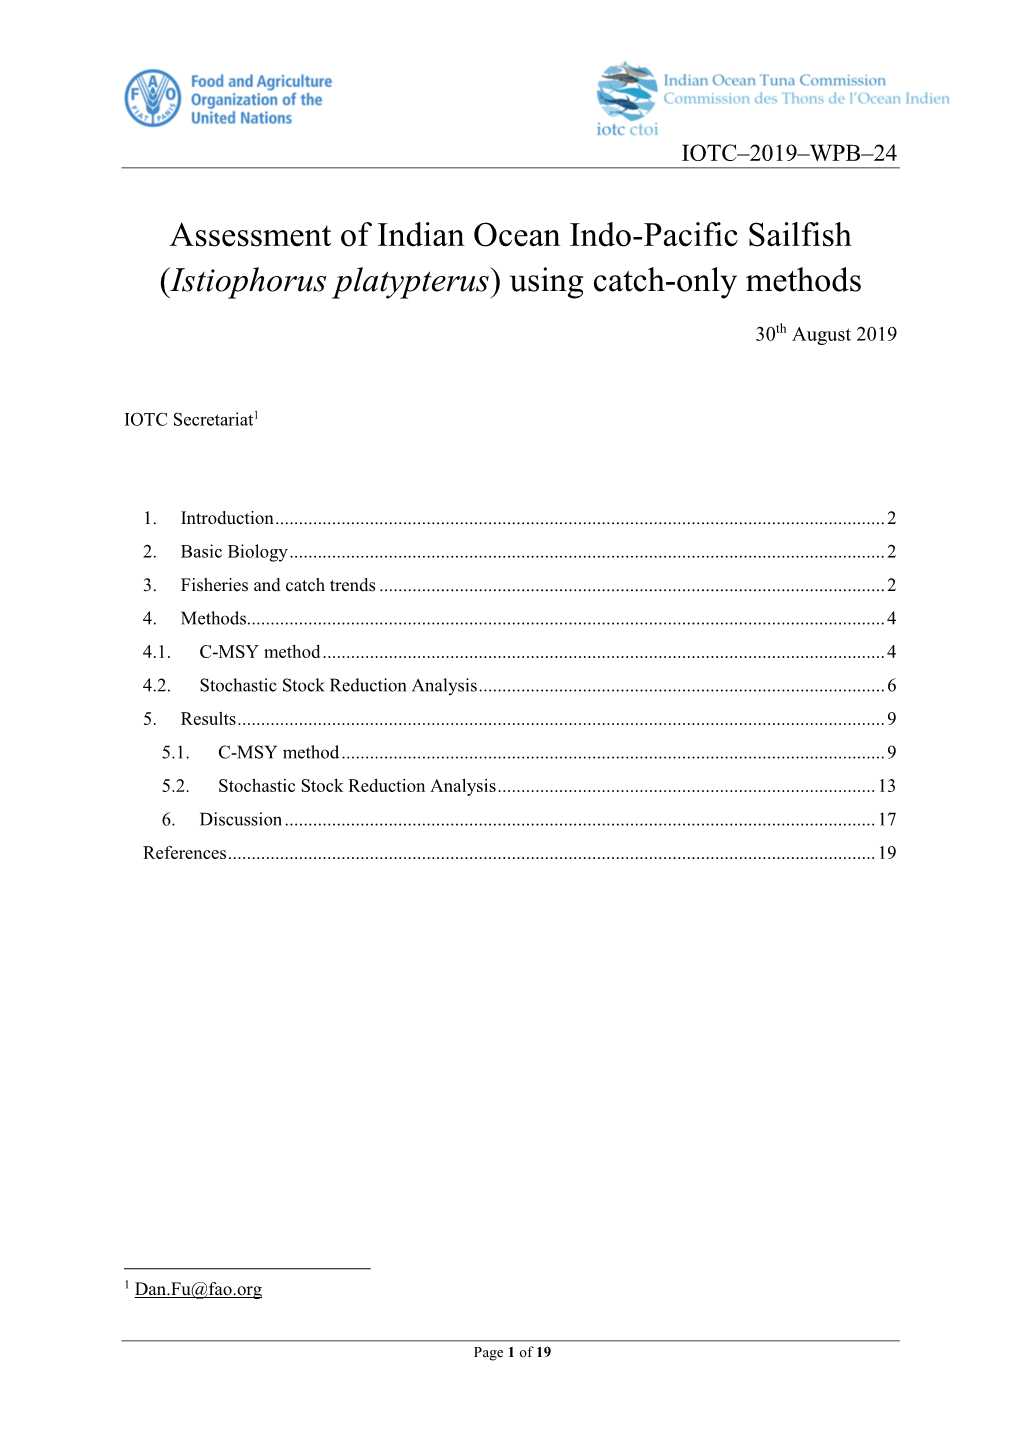 Assessment of Indian Ocean Indo-Pacific Sailfish (Istiophorus Platypterus) Using Catch-Only Methods